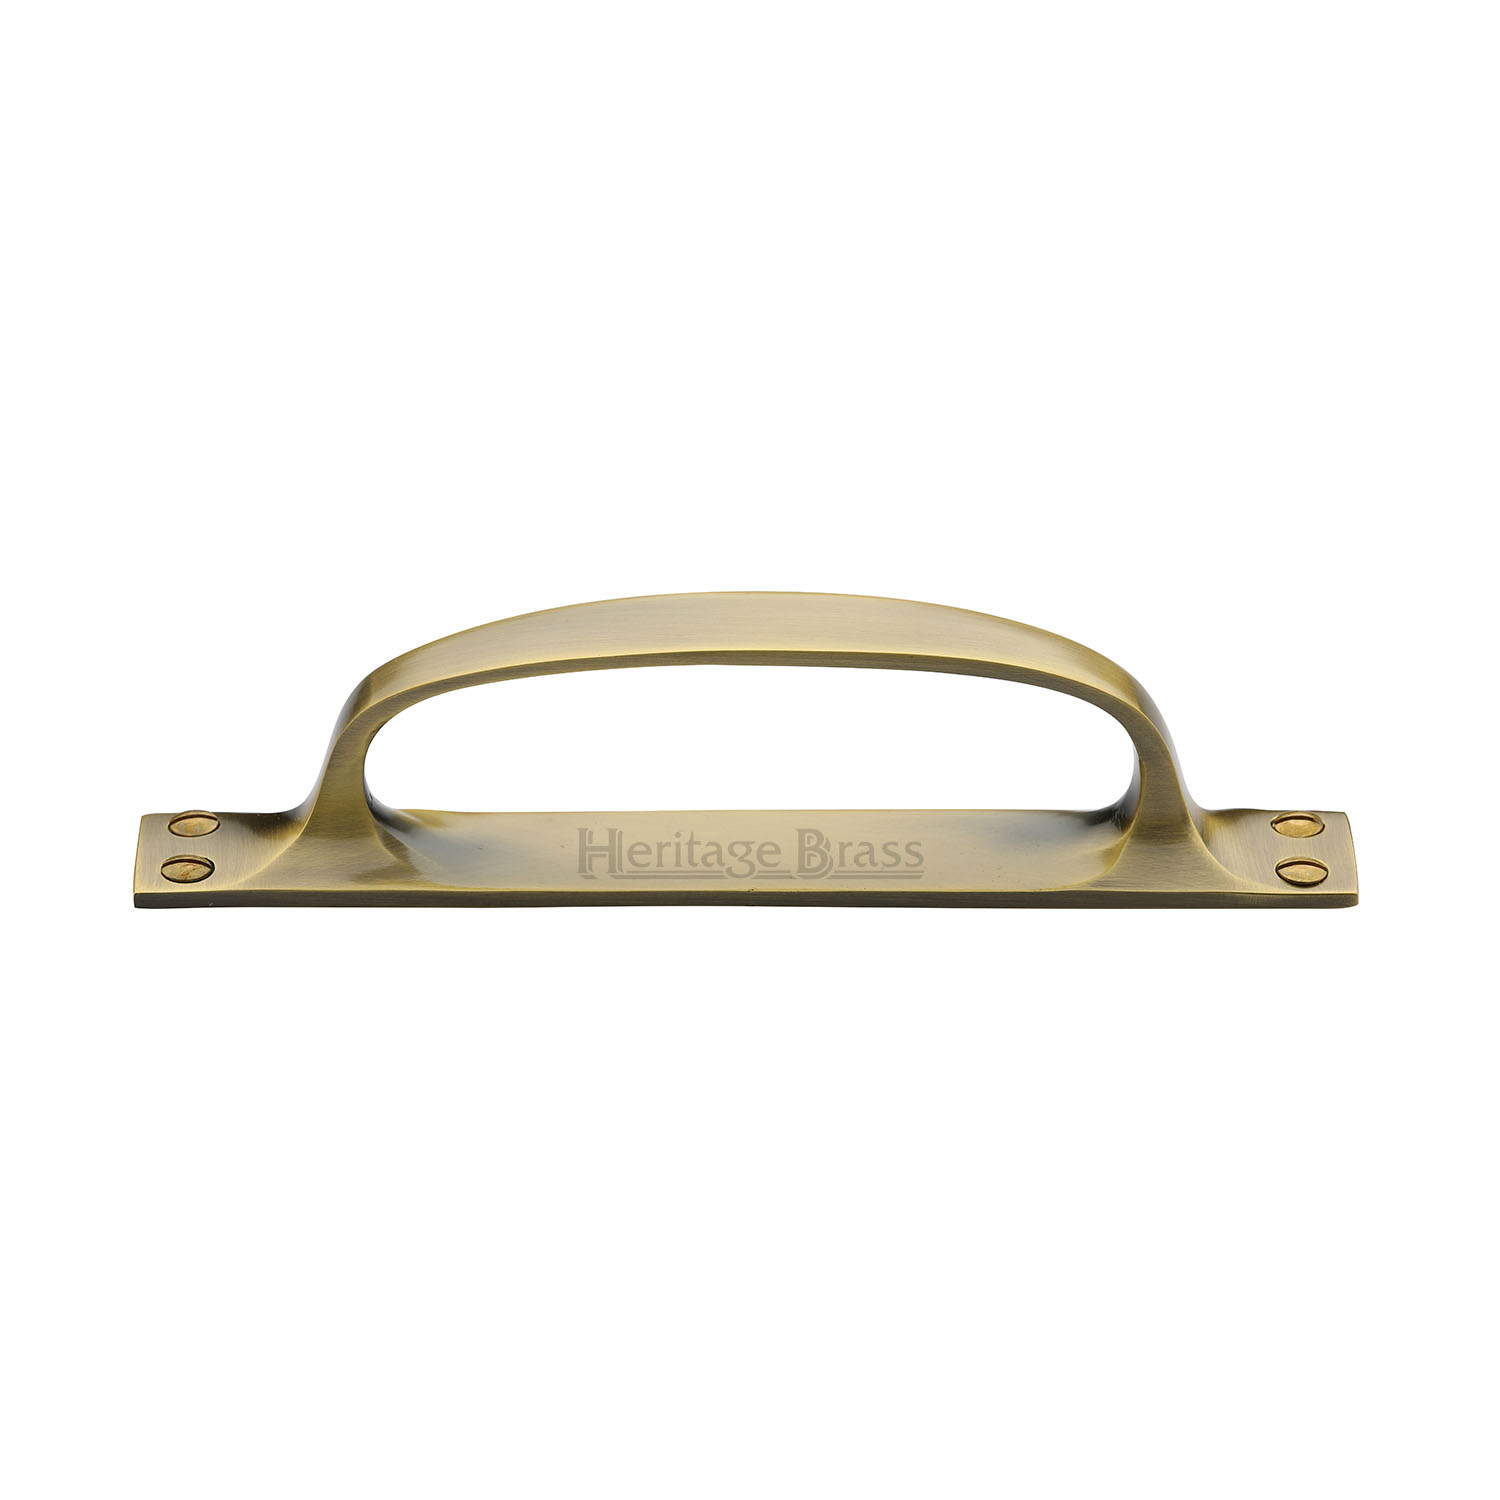 Heritage Brass Pull Handle on Plate